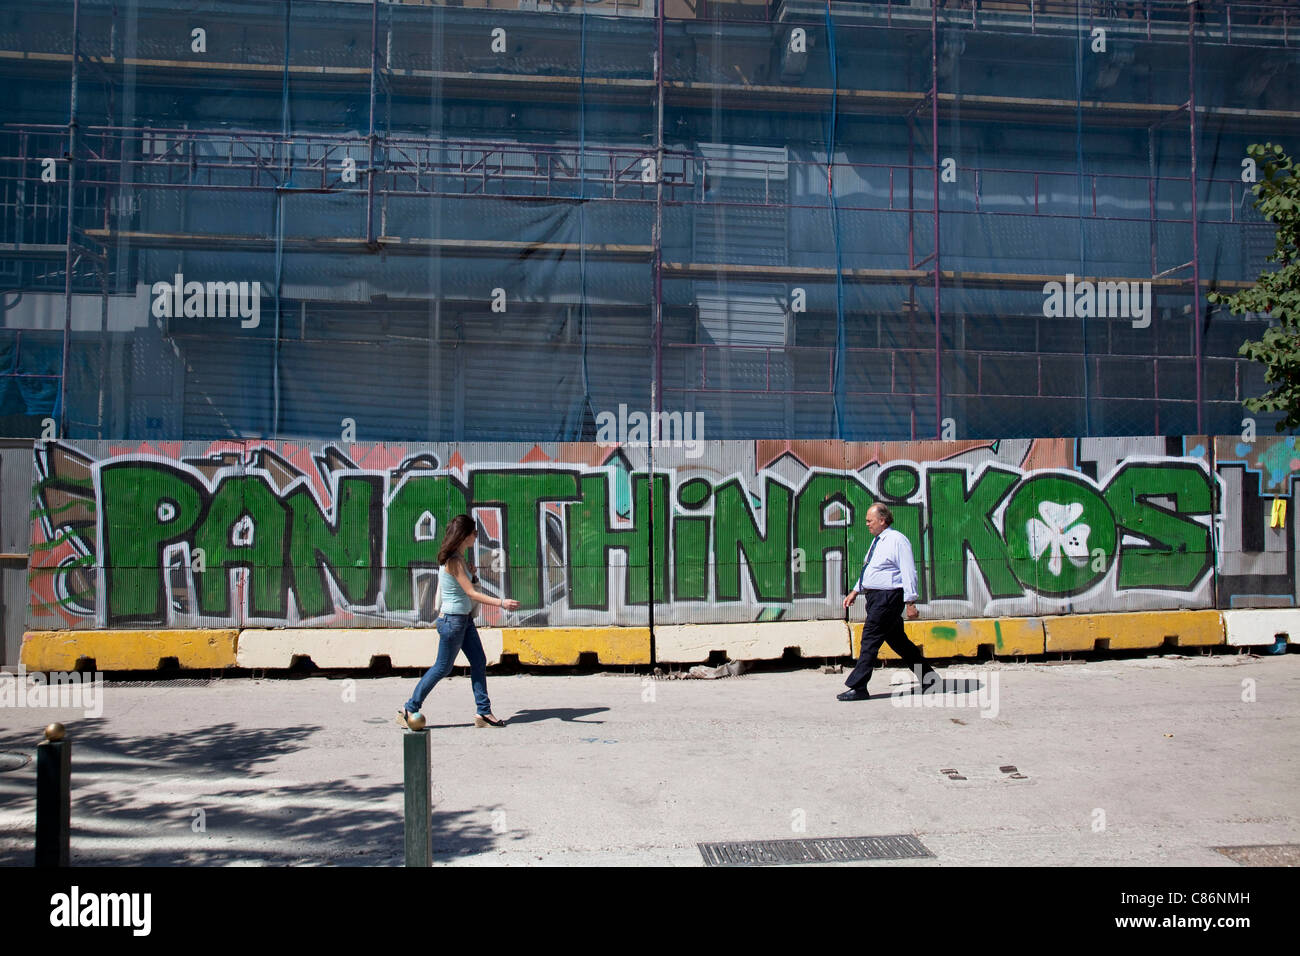 Graffiti in Omonia in support of Greek football team Panathinaikos. The name and symbol 'Triffili' is seen all over Athens. Stock Photo